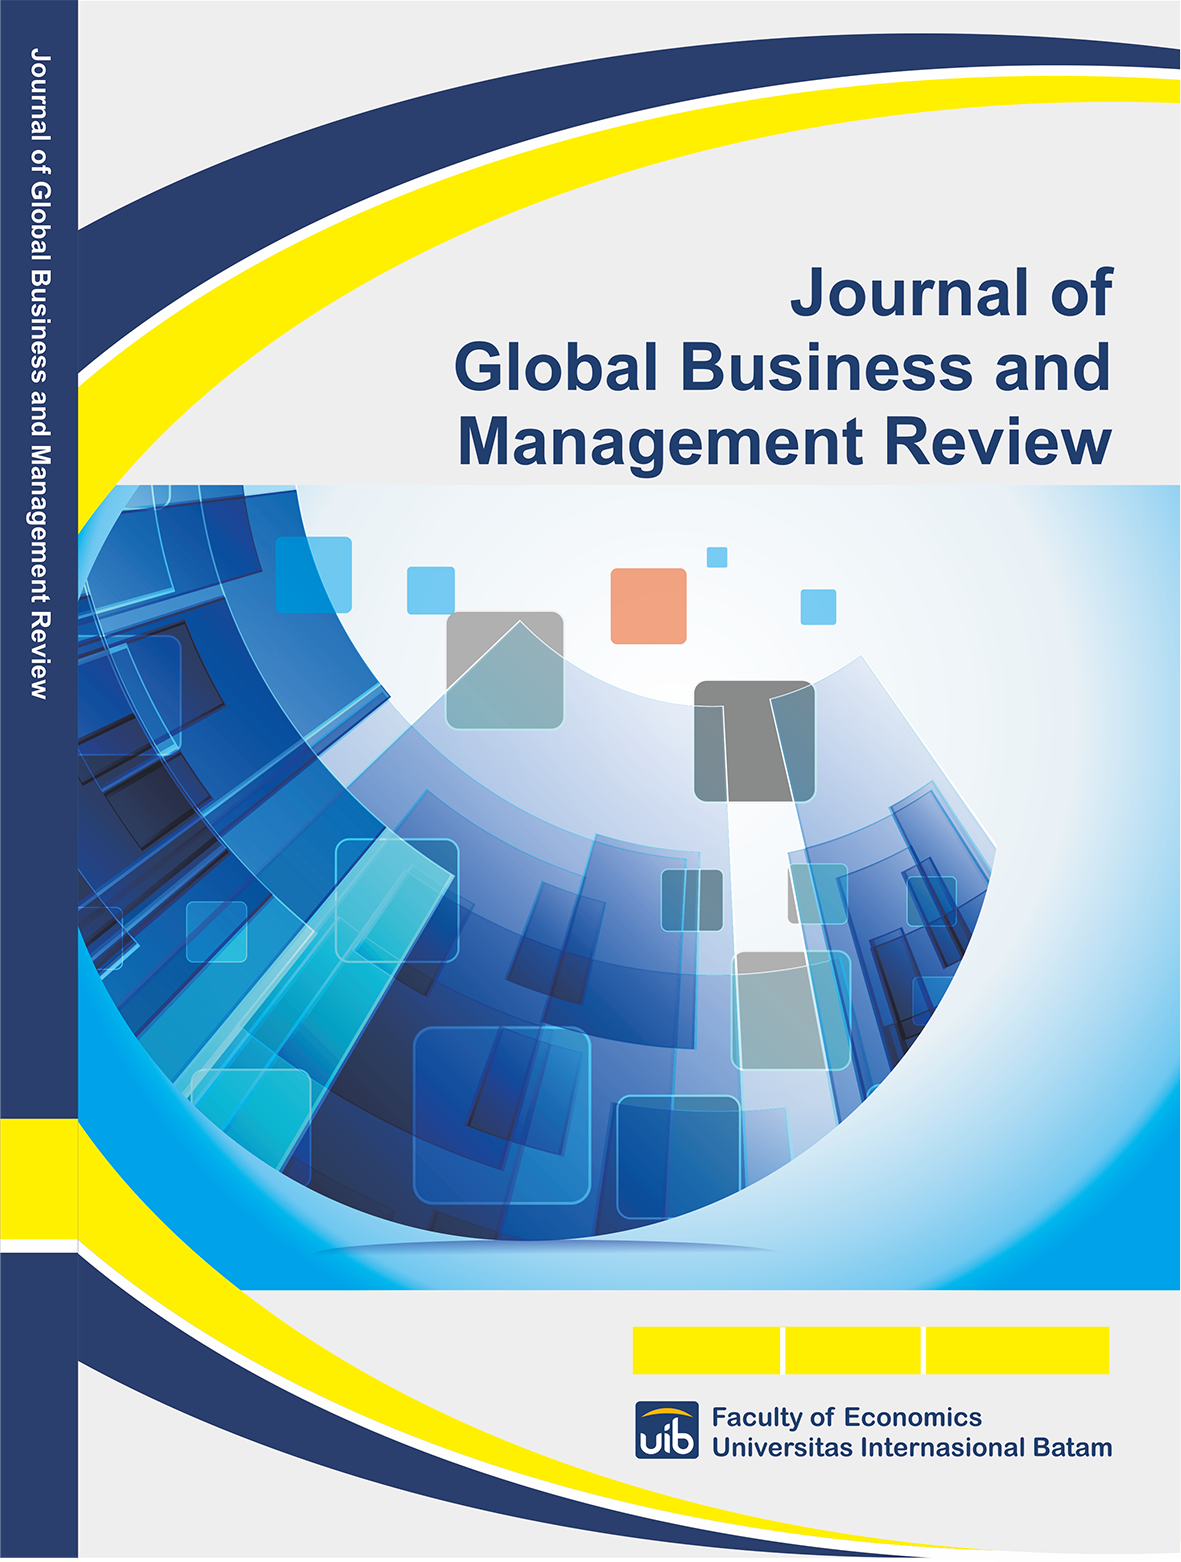 					View Vol. 3 No. 2 (2021): Journal of Global Business and Management Review
				